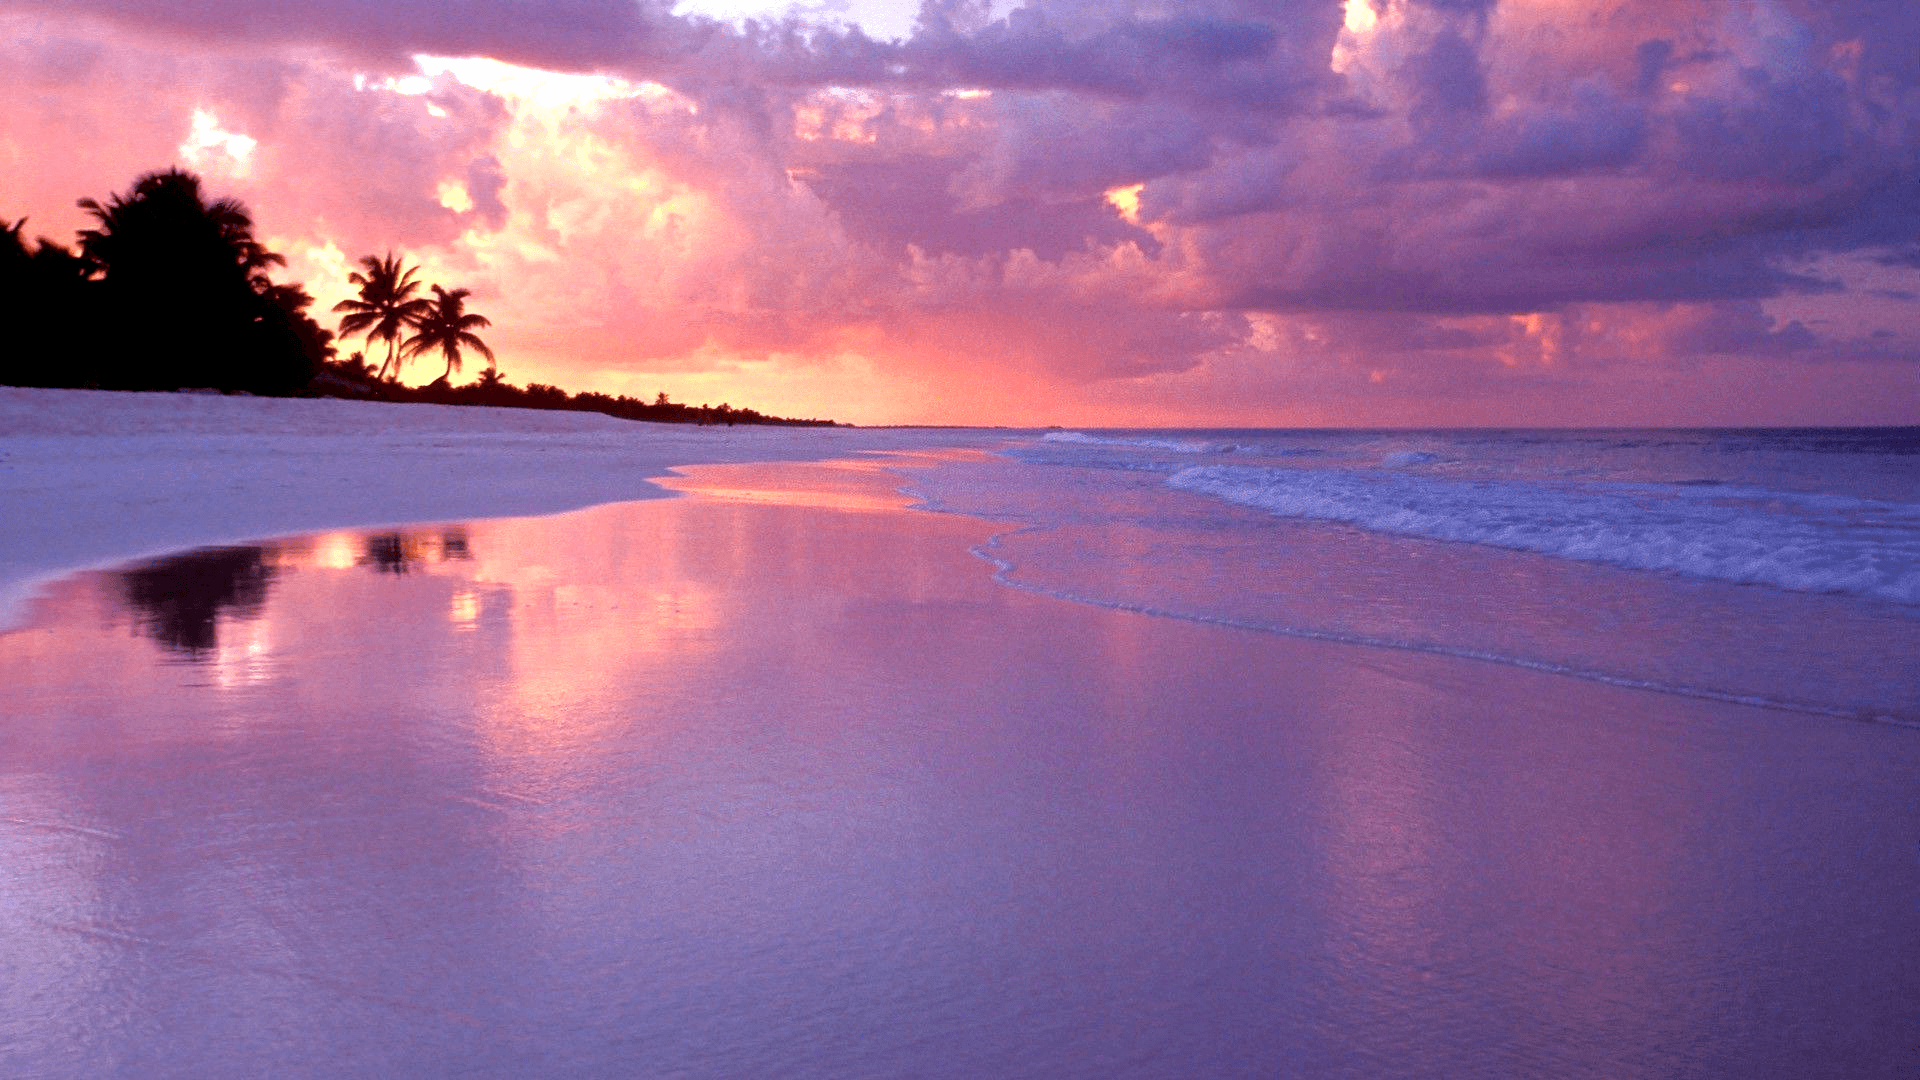 Beaches Sunset Wallpapers - 4K, Hd Beaches Sunset Backgrounds On